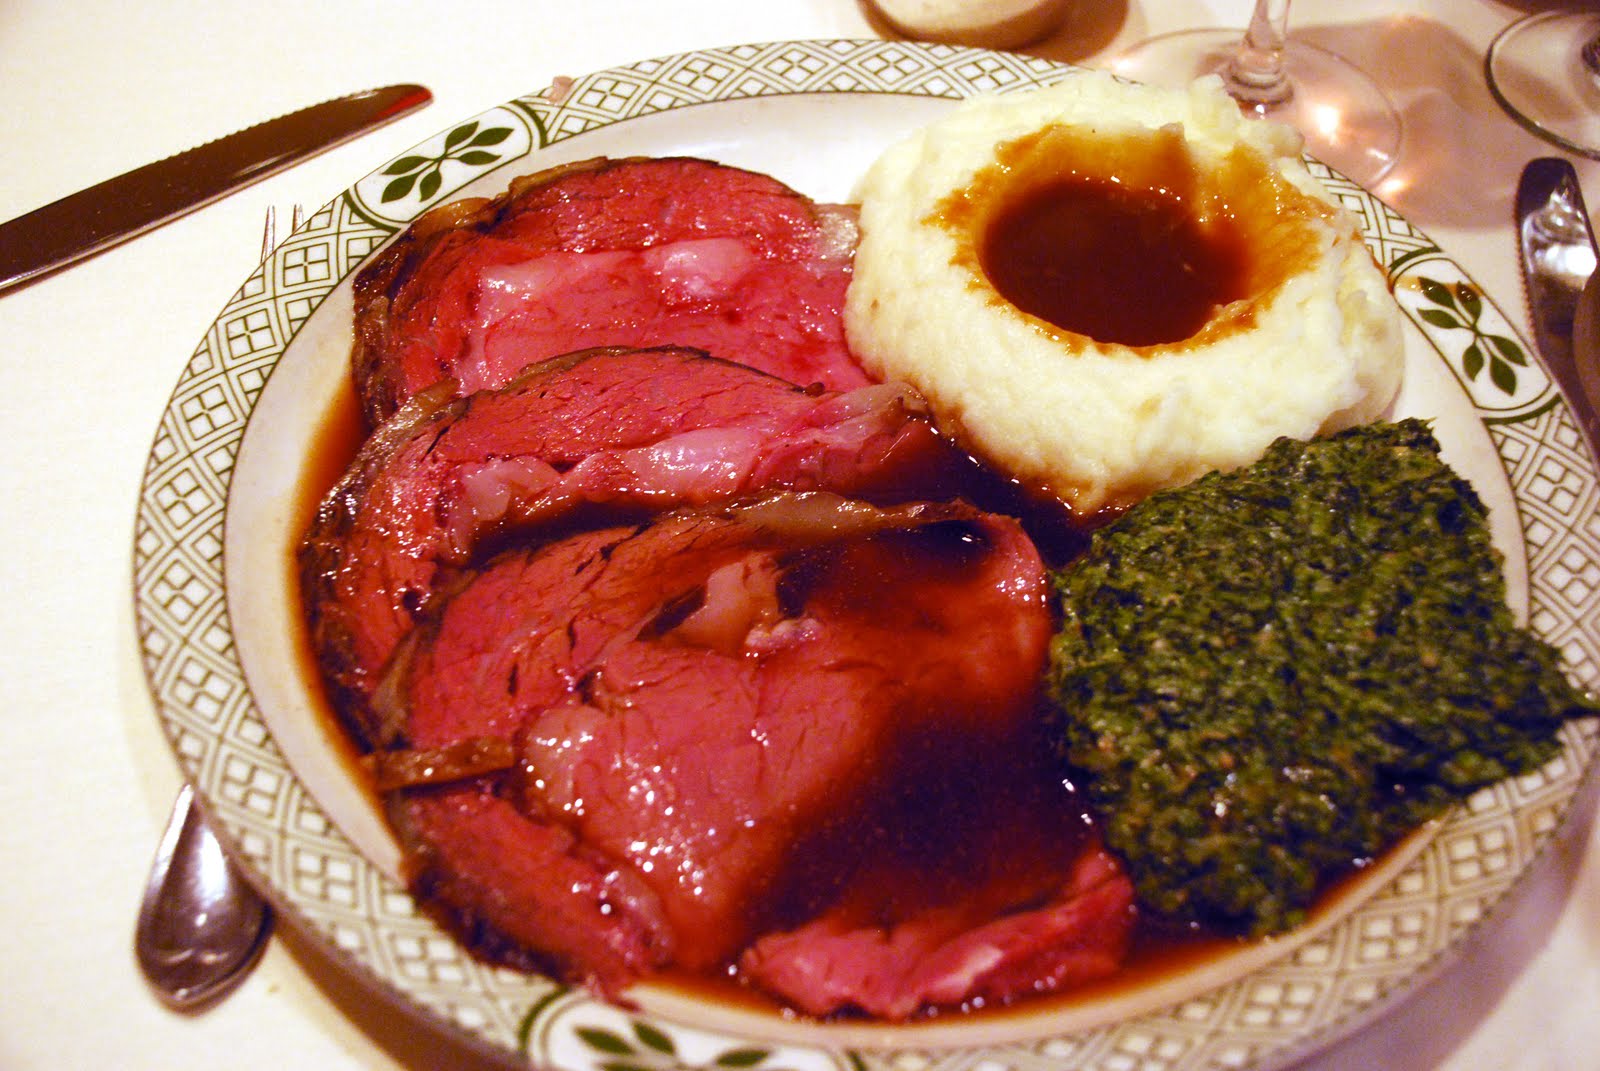 I'll Have Everything...And a Side to Go: BEST Prime Rib